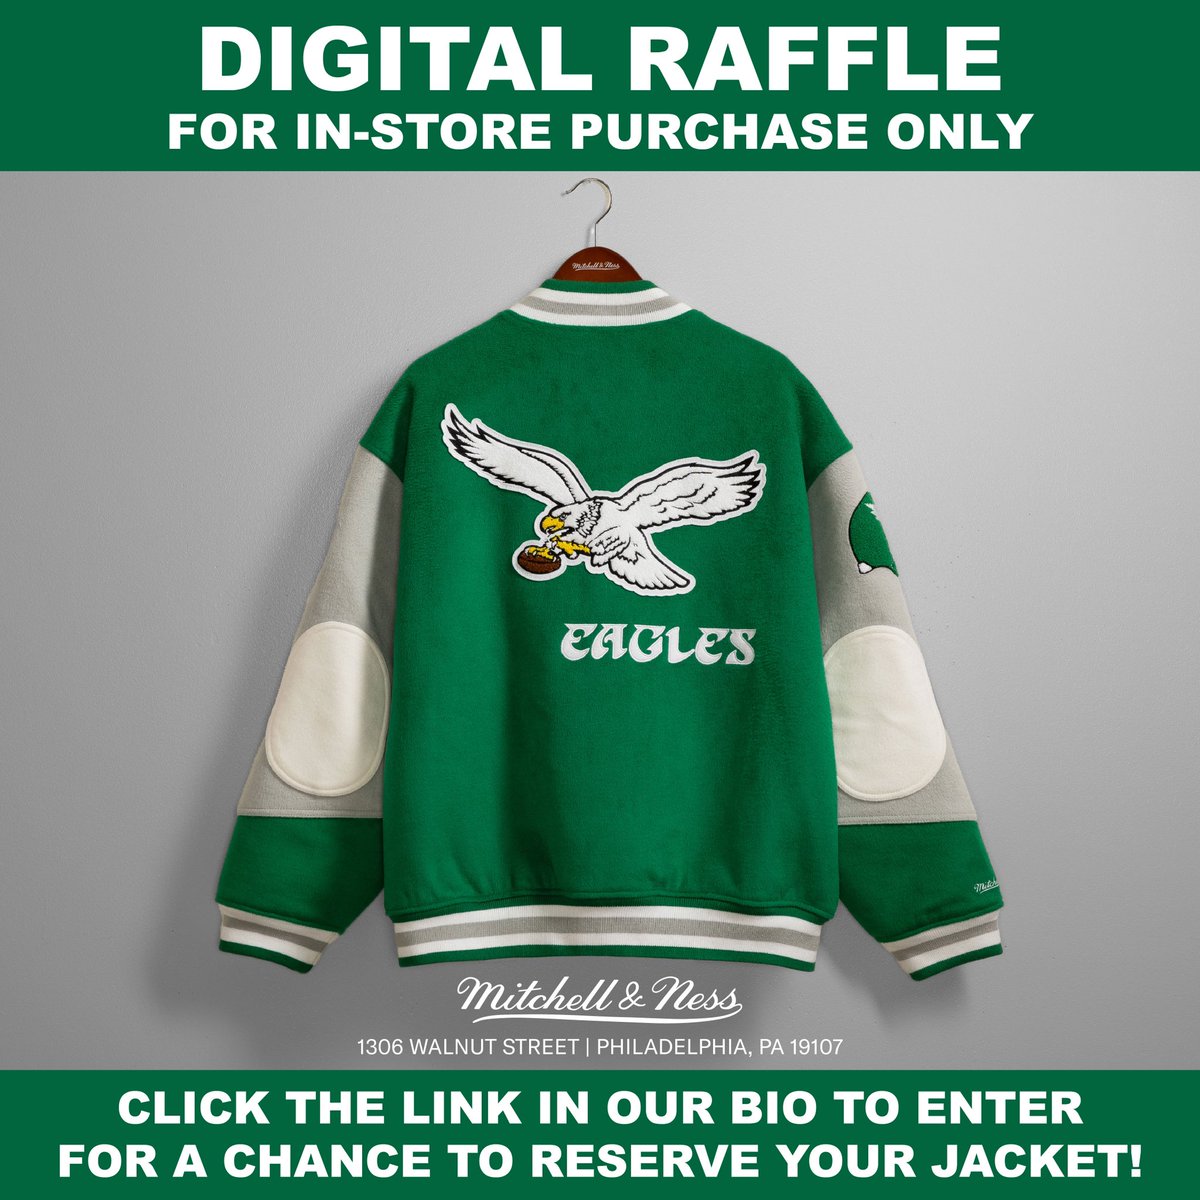 🚨Eagles Varsity Jacket Raffle🚨 DIGITAL RAFFLE FOR IN-STORE PURCHASE ONLY The Mitchell & Ness Flagship Store is offering our in-store customers a chance to purchase the Eagles Team Varsity Jacket via digital raffle. Click the link in our bio for details!